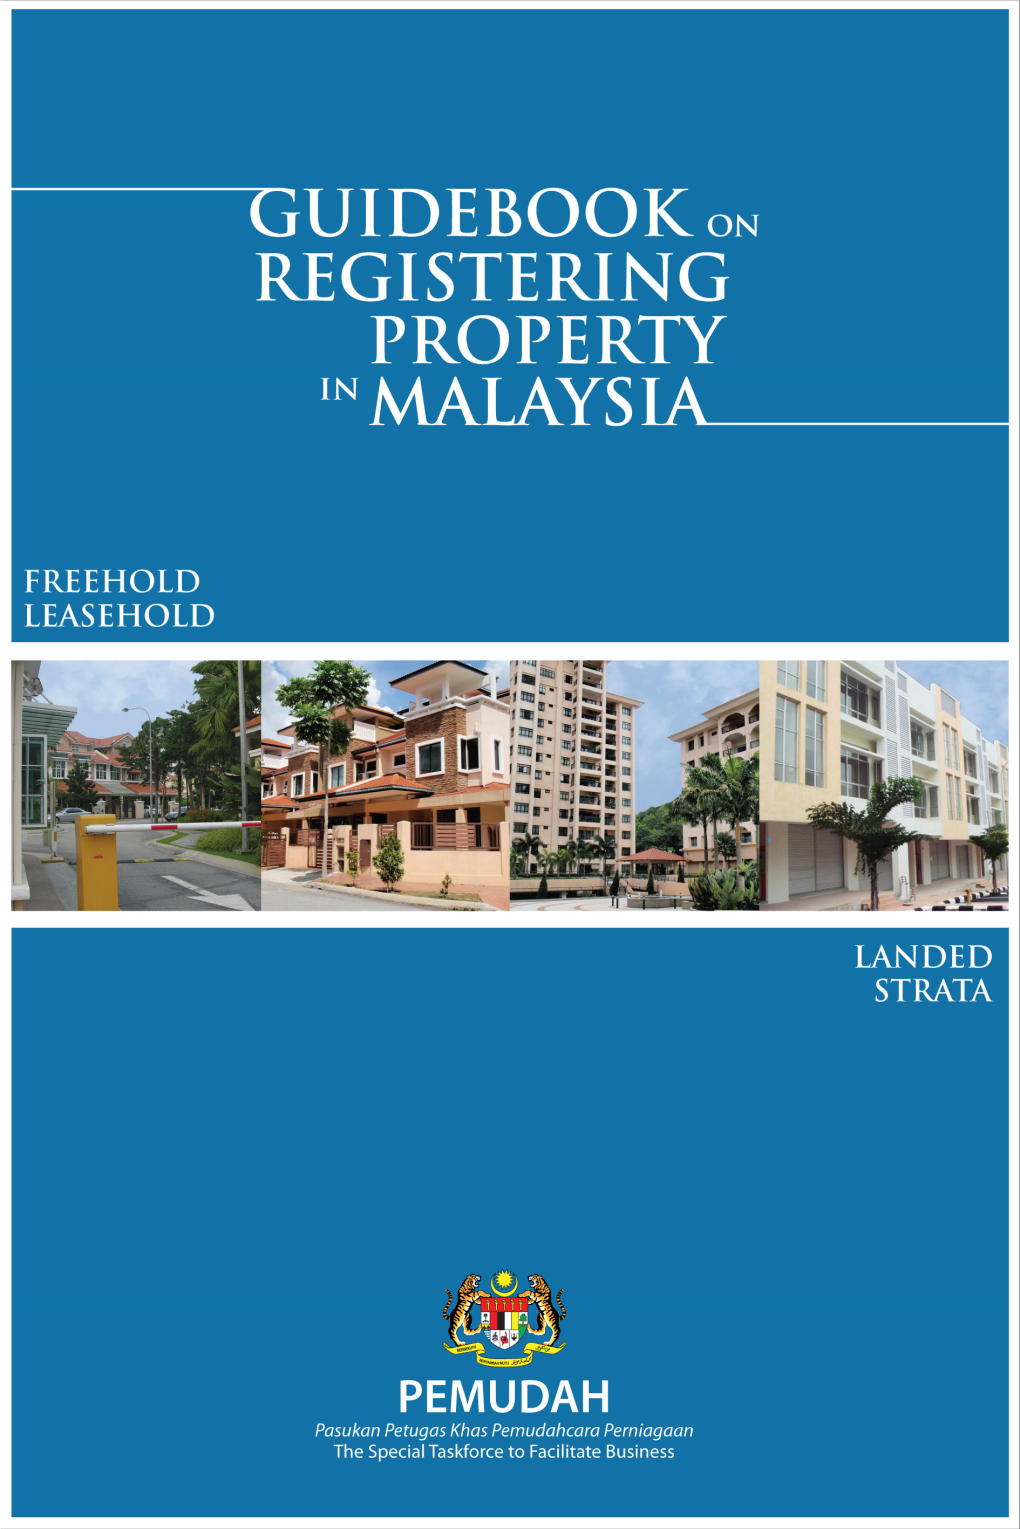 GUIDEBOOK on REGISTERING PROPERTY in MALAYSIA